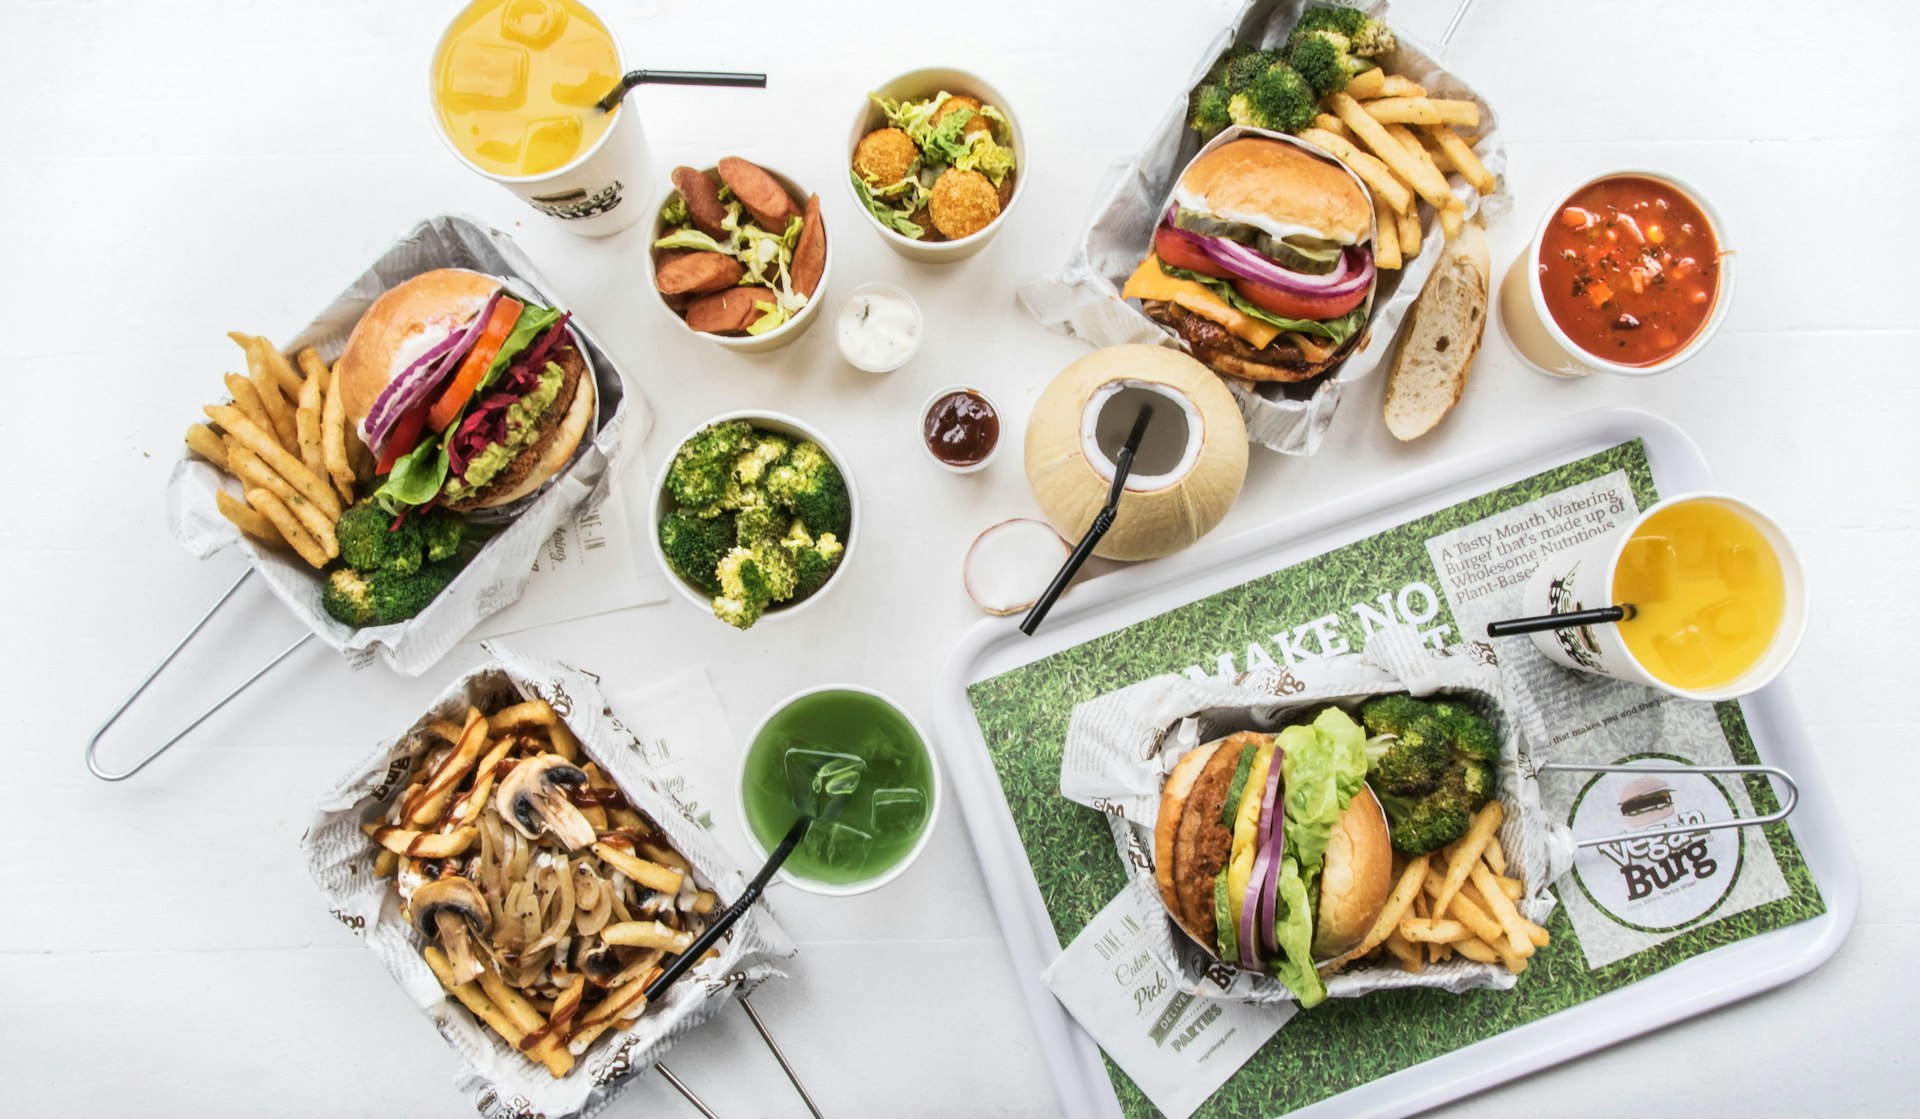 An overhead view of a table filled with dishes of vegan burgers with broccoli and french fries, small salads and a variety of cups; San Francisco Bay vegan restaurant 